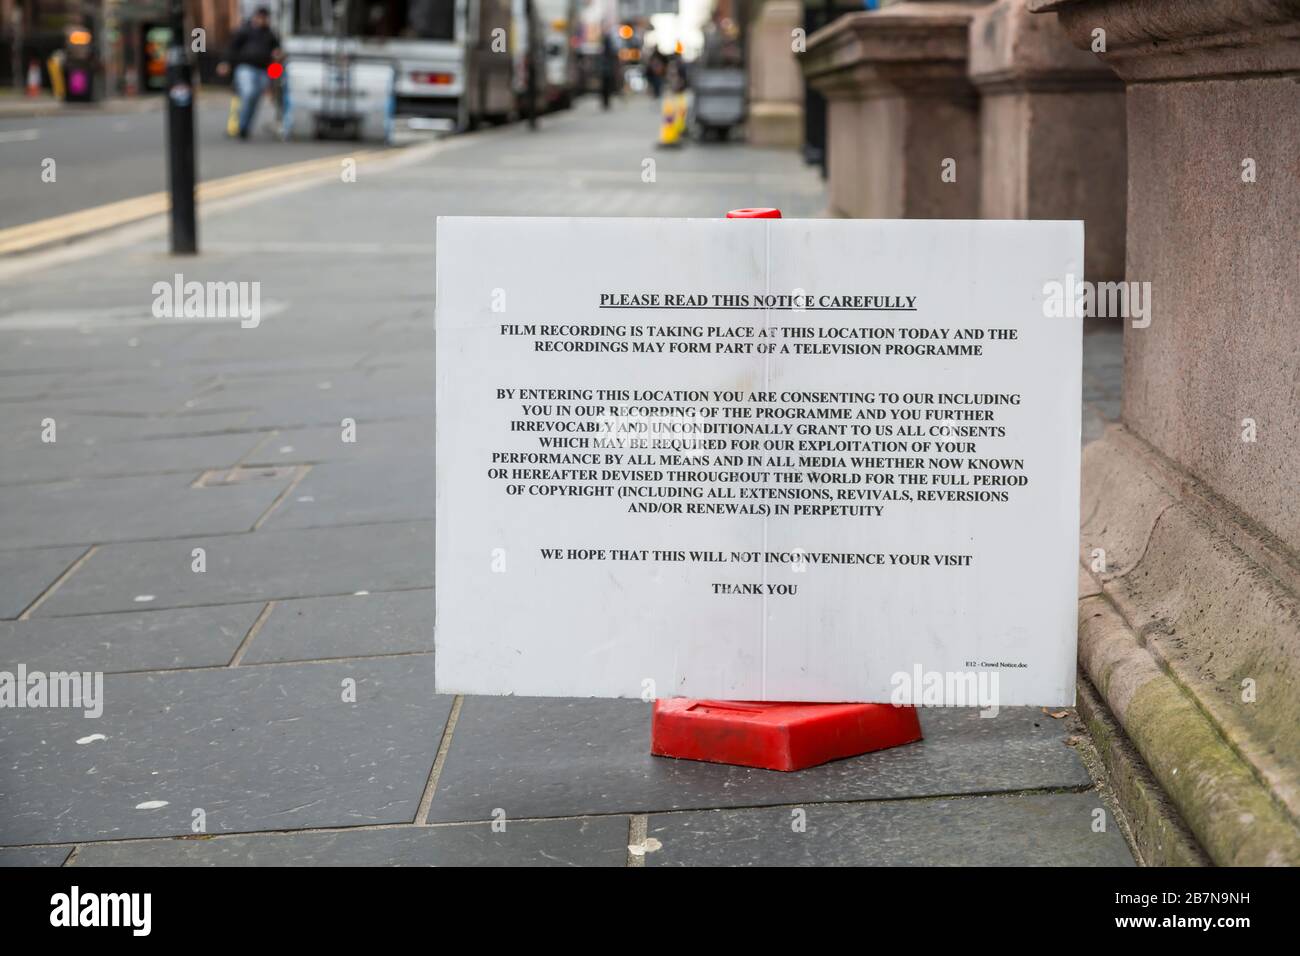 A sign informing pedestrians of filming taking place on a street in Glasgow city centre and consent will be assumed, Scotland, UK Stock Photo